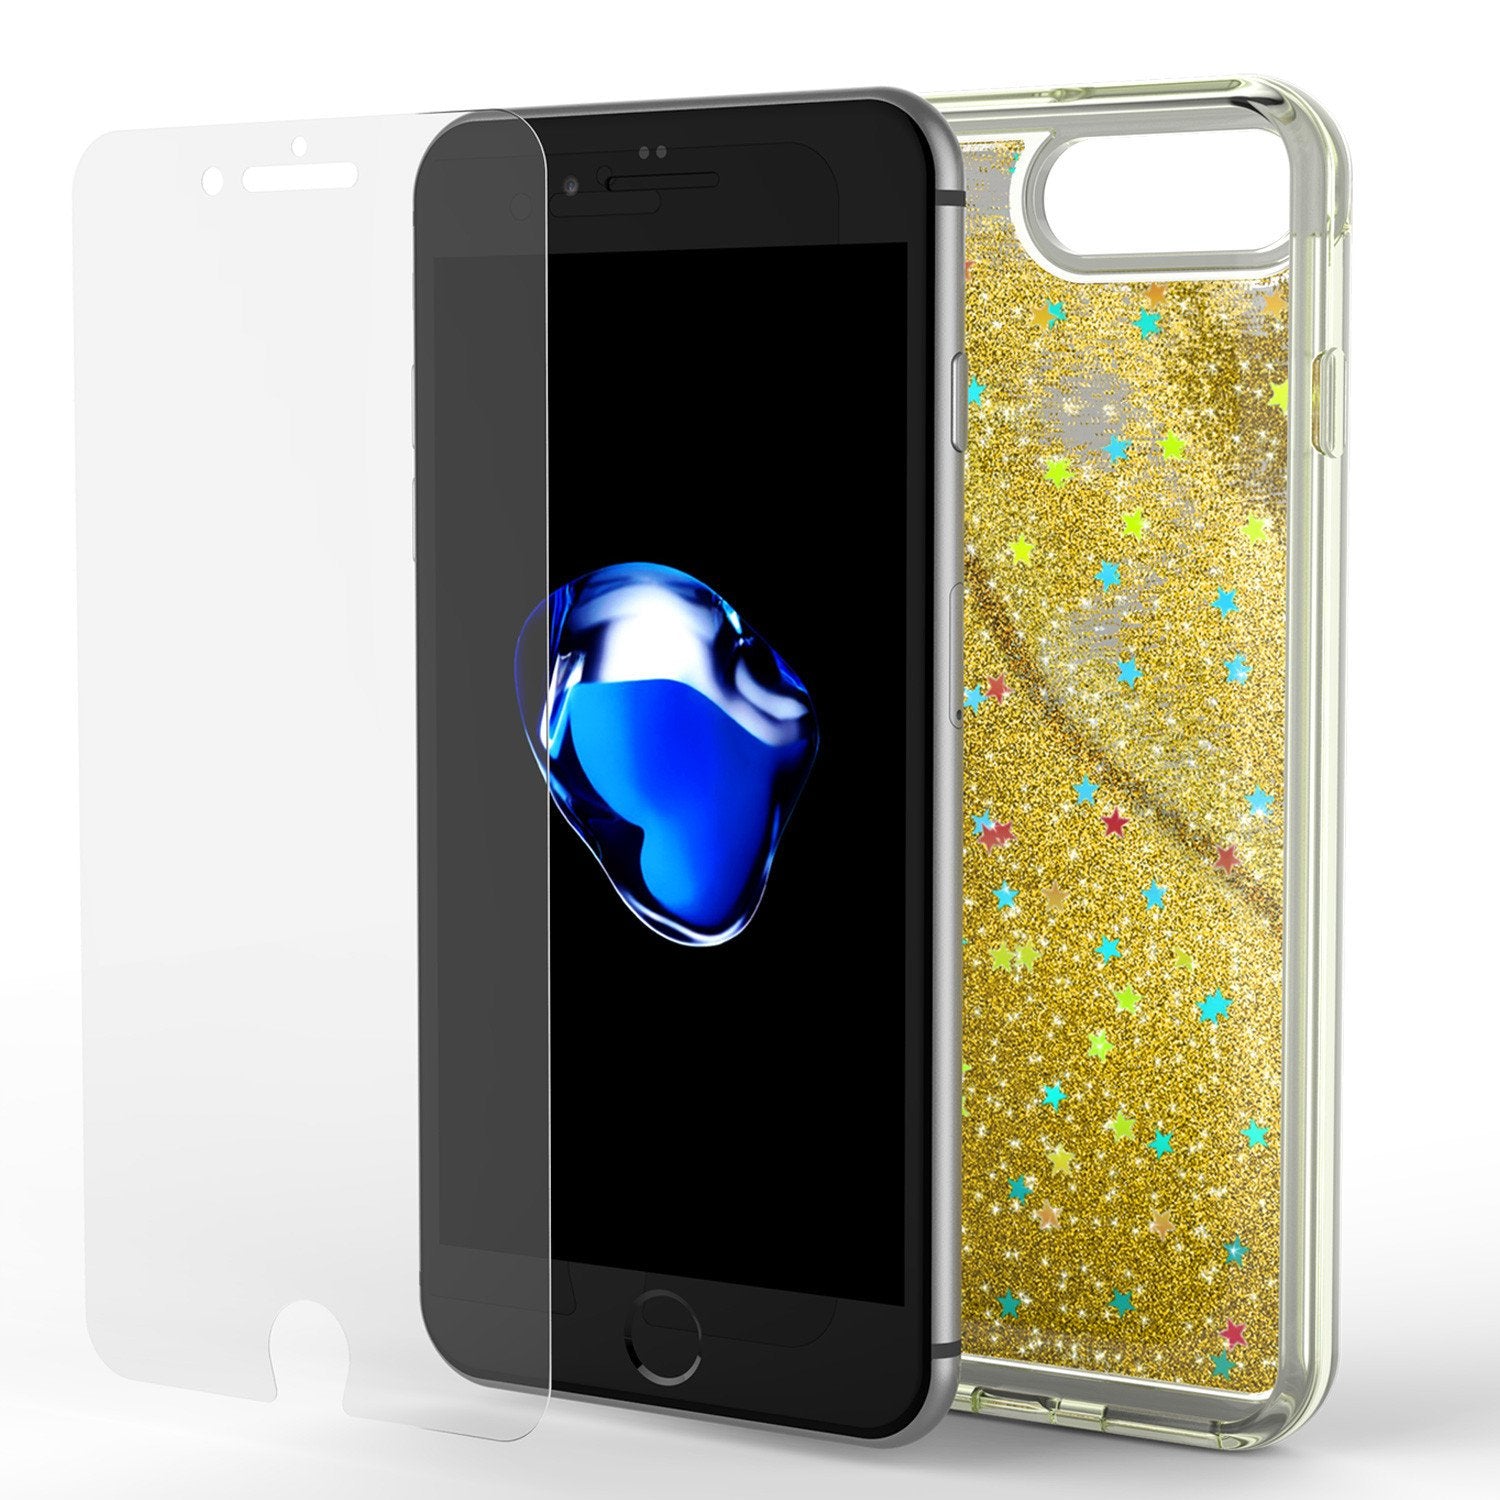 iPhone 7 Plus Case, Punkcase [Liquid Gold Series] Protective Dual Layer Floating Glitter Cover with lots of Bling & Sparkle + 0.3mm Tempered Glass Screen Protector for Apple iPhone 7s Plus